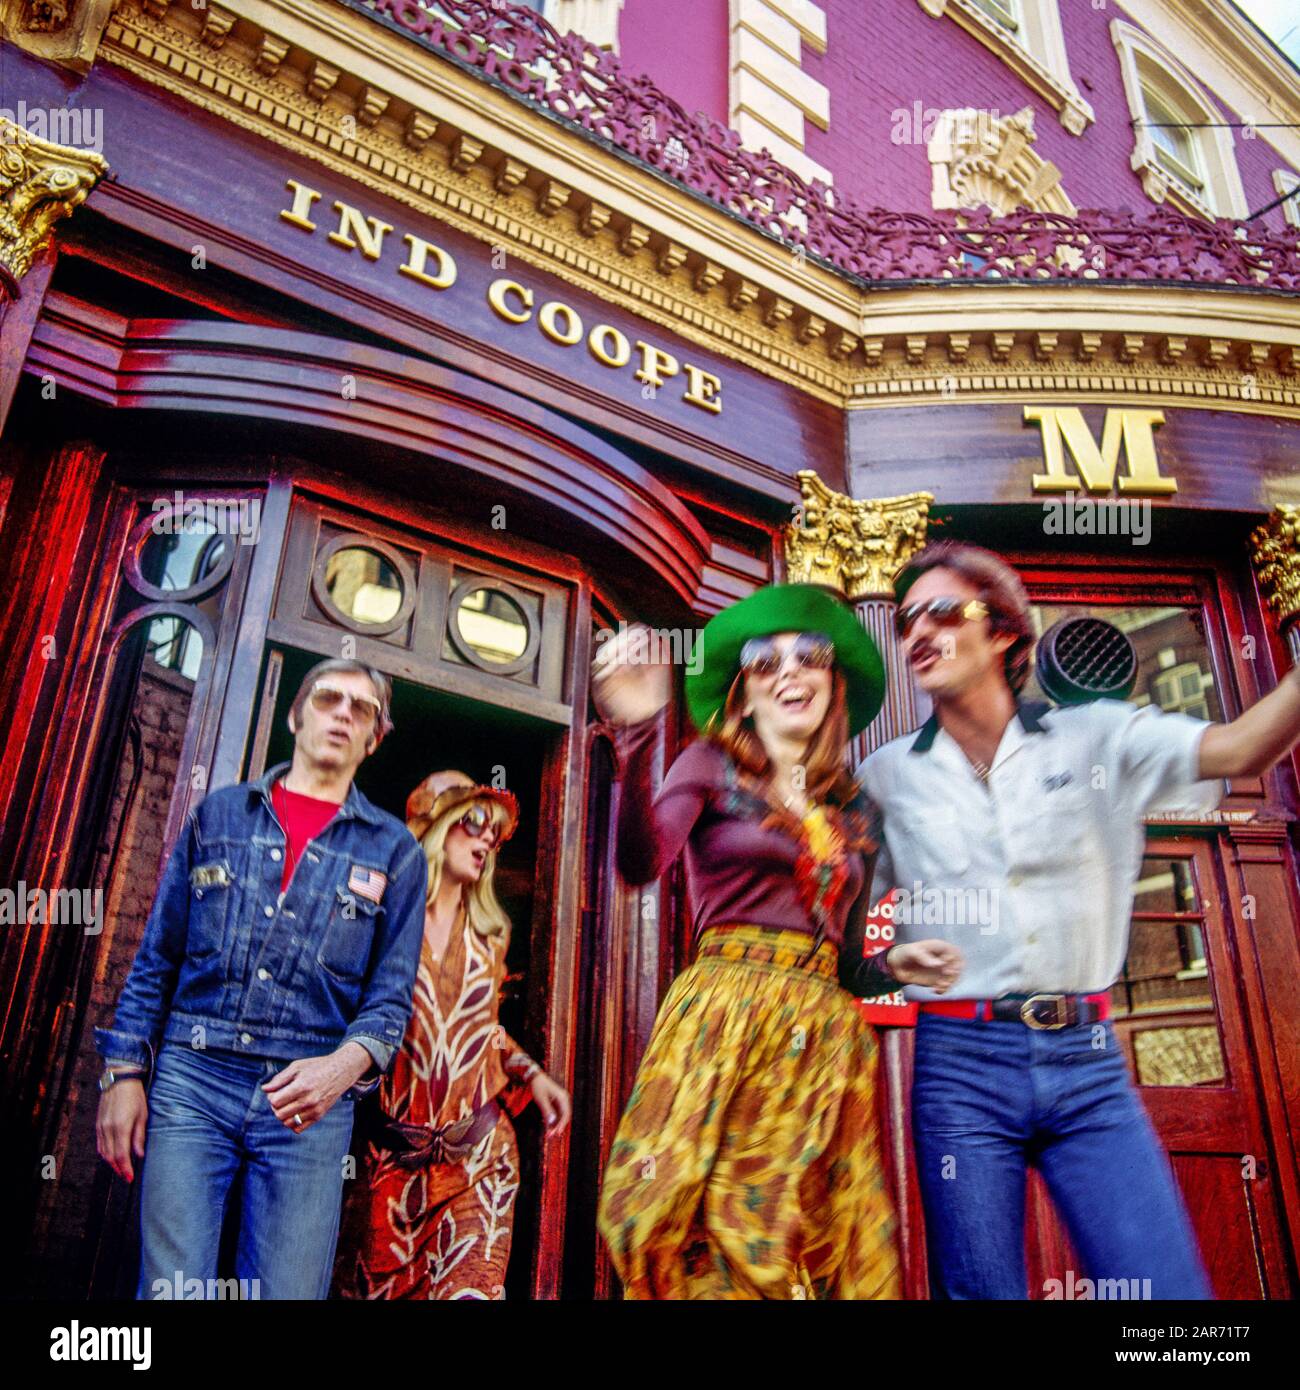 London 1970s, exuberant moving people coming out from Ind Coope Markham Pub, Kings Road, Chelsea, England, UK, GB, Great Britain, Stock Photo